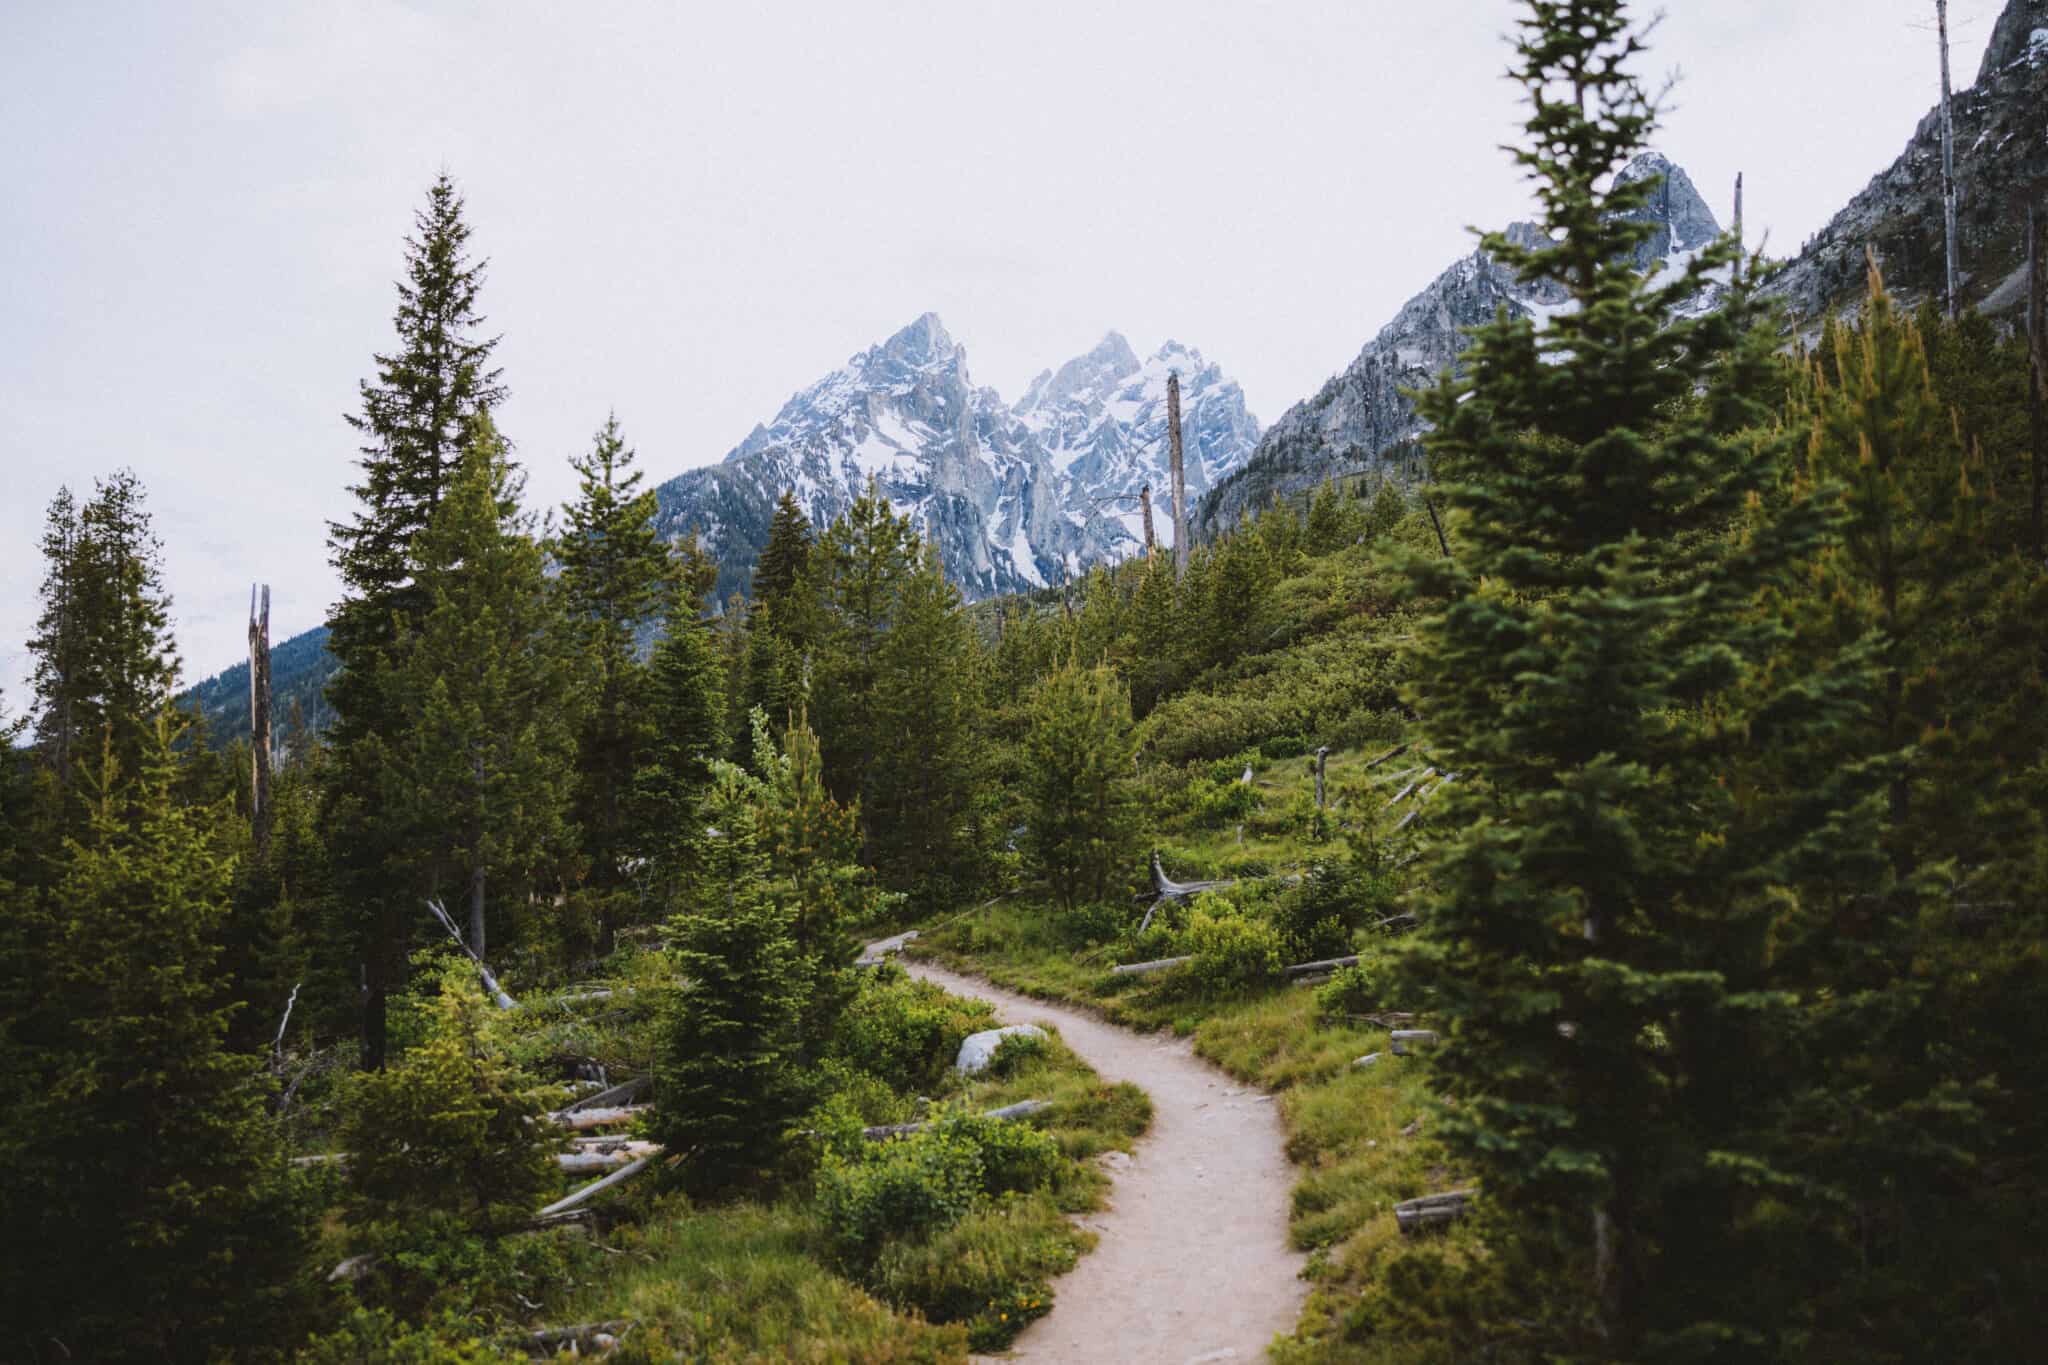 The Best Guide To String Lake Trail In The Grand Tetons, Wyoming